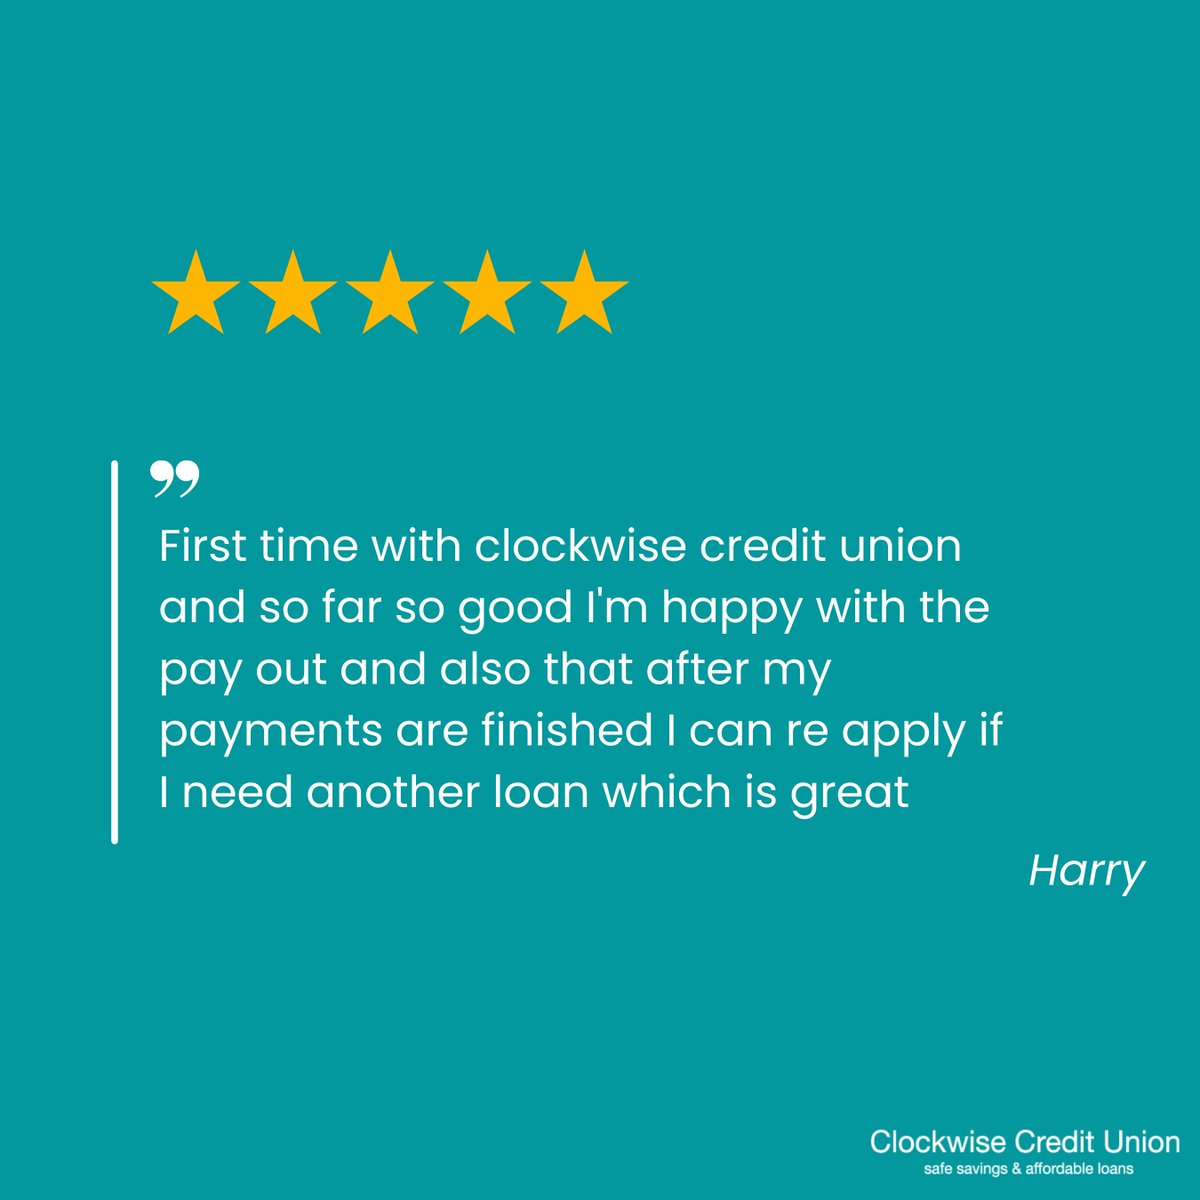 Thank you Harry for your kind review  🌟

#moneysavingstips #moneysaving #moneytips #financetips #Leicester #Leicestershire #Rutland #Northamptonshire #Coventry #Warwickshire